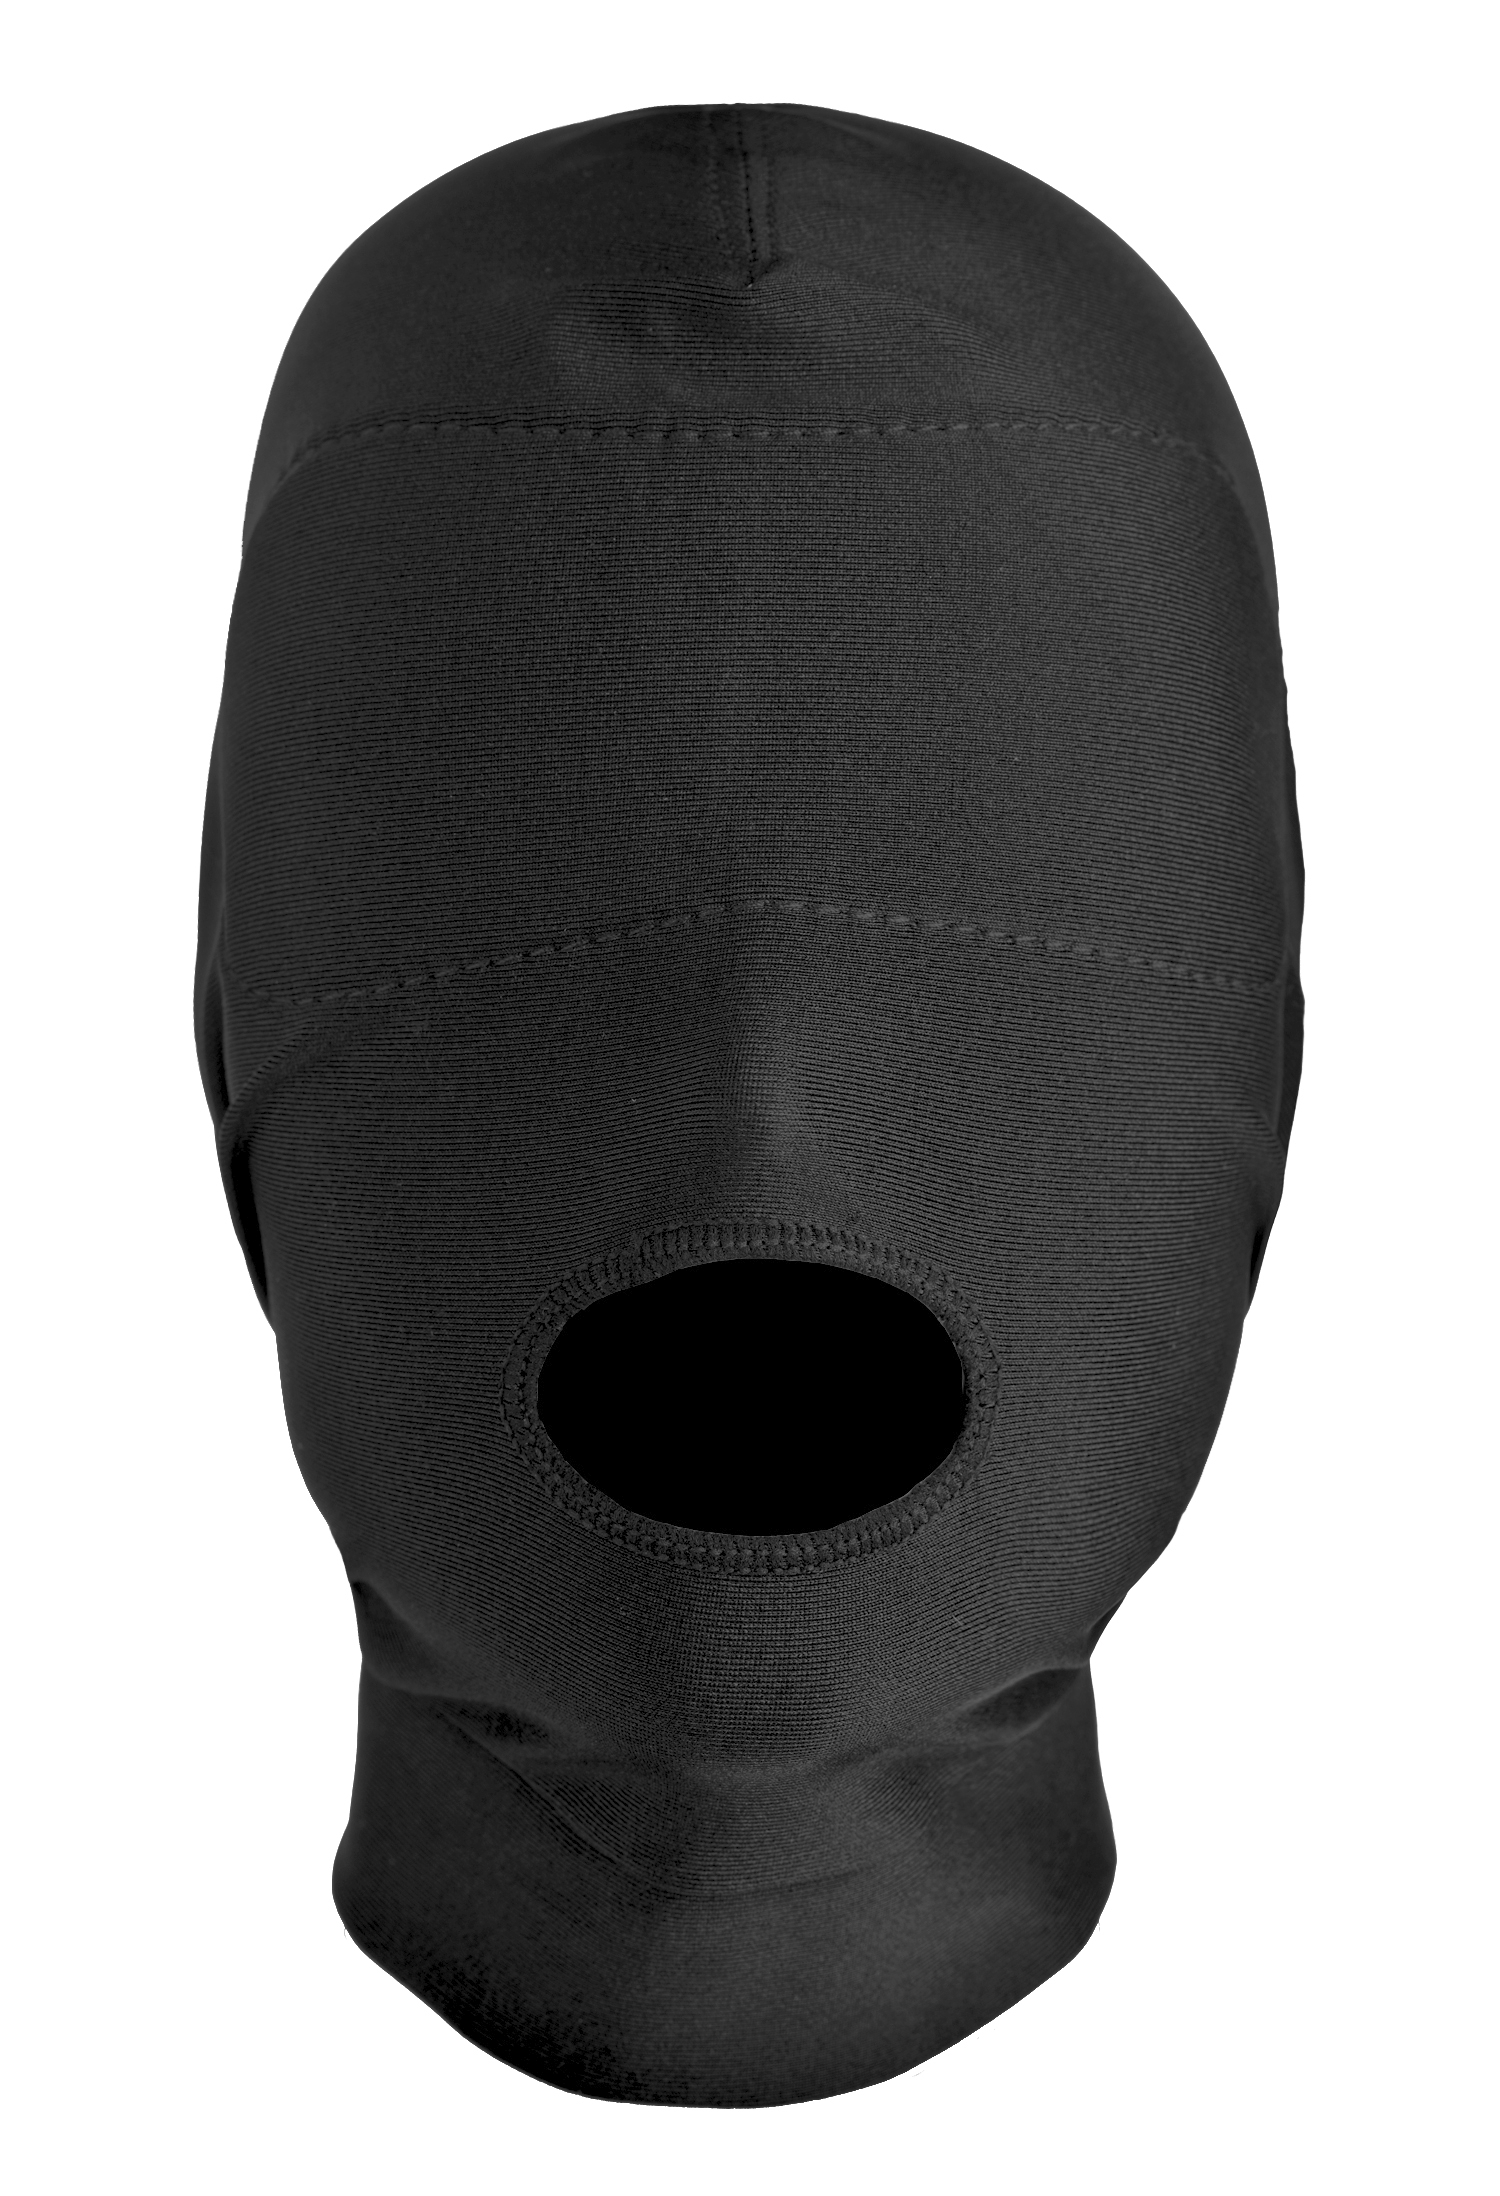 MASTER SERIES DISGUISE OPEN MOUTH HOOD - XRAE167